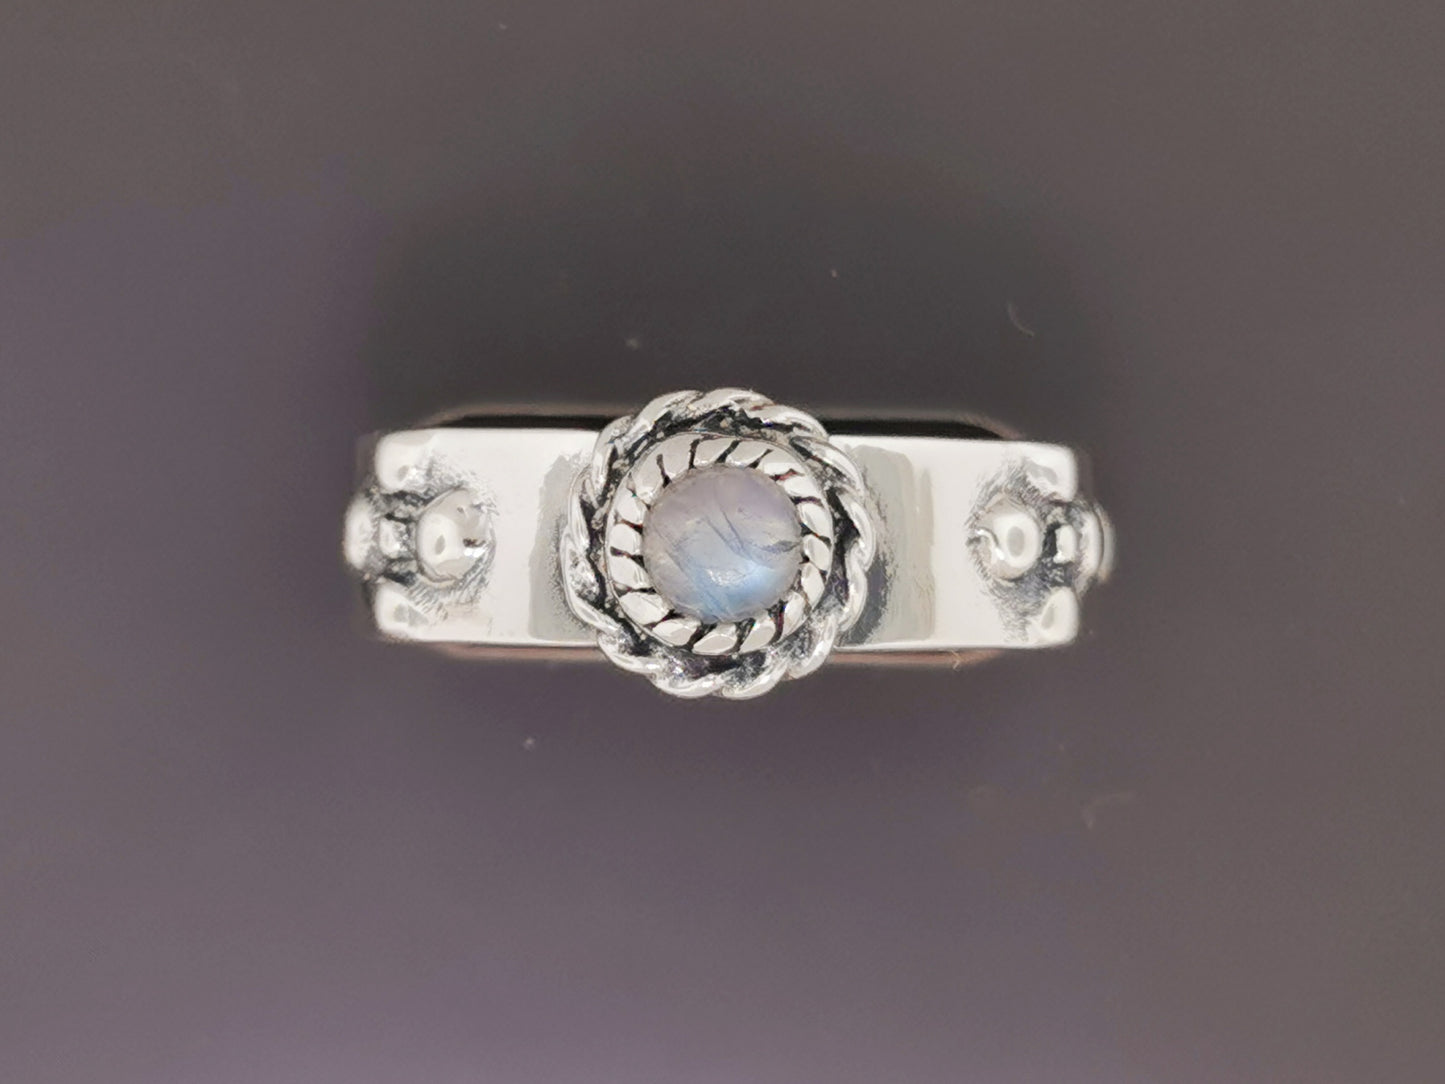 Howls Calcifer Fire Ring in Sterling Silver with Genuine Gemstone, Howls Moving Castle Ring, Howl and Sophie Rings, Silver Howls Moving Castle Ring, Calcifer Silver Ring, Gemstone Engagement Ring, Howls Moving Castle Ring with genuine moonstone